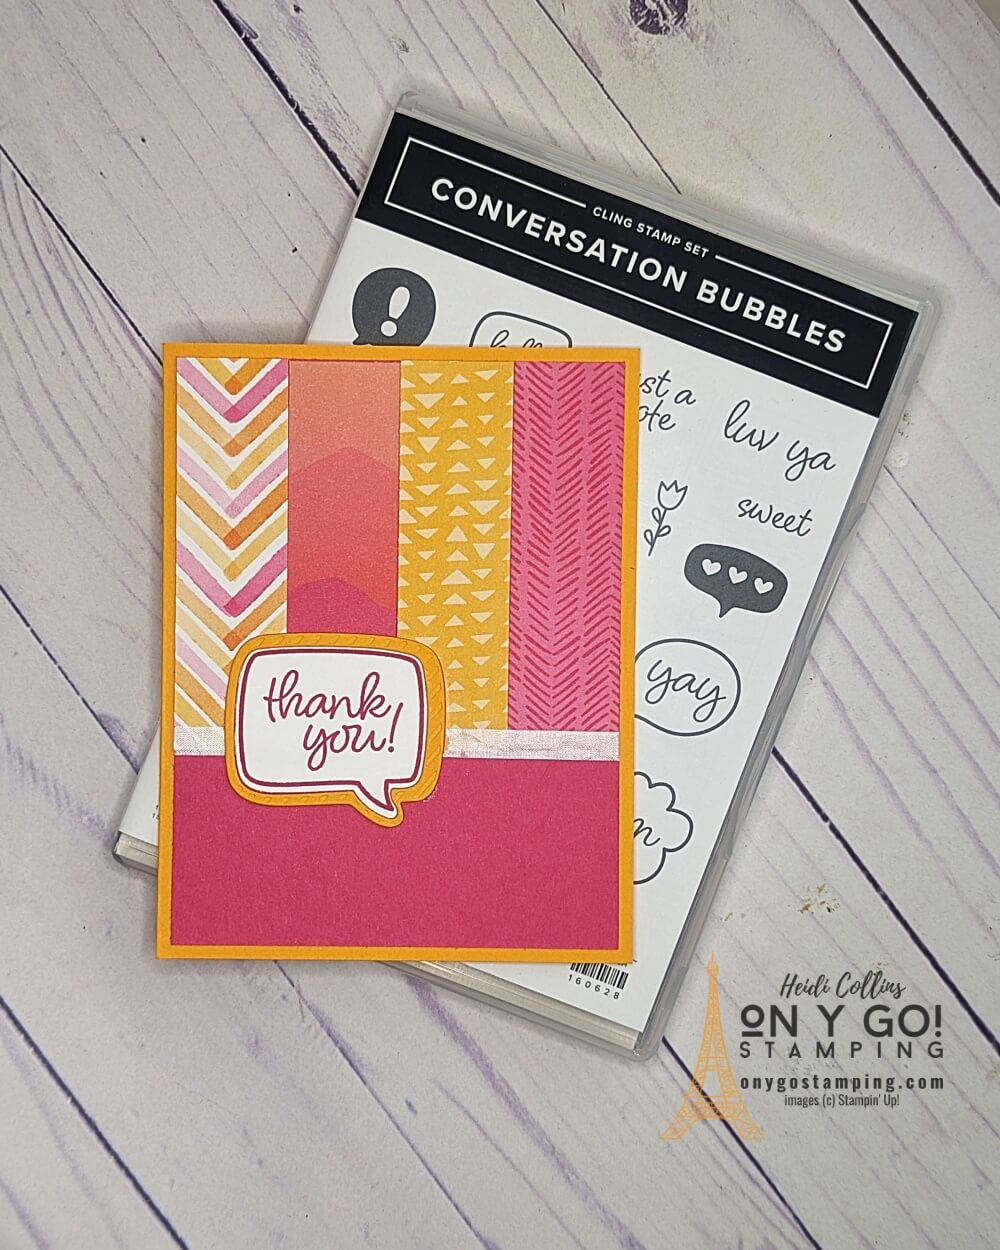 Easy thank you card idea from a card sketch with the Conversation Bubbles stamp set and Enjoy the Journey patterned paper from Stampin' Up!®